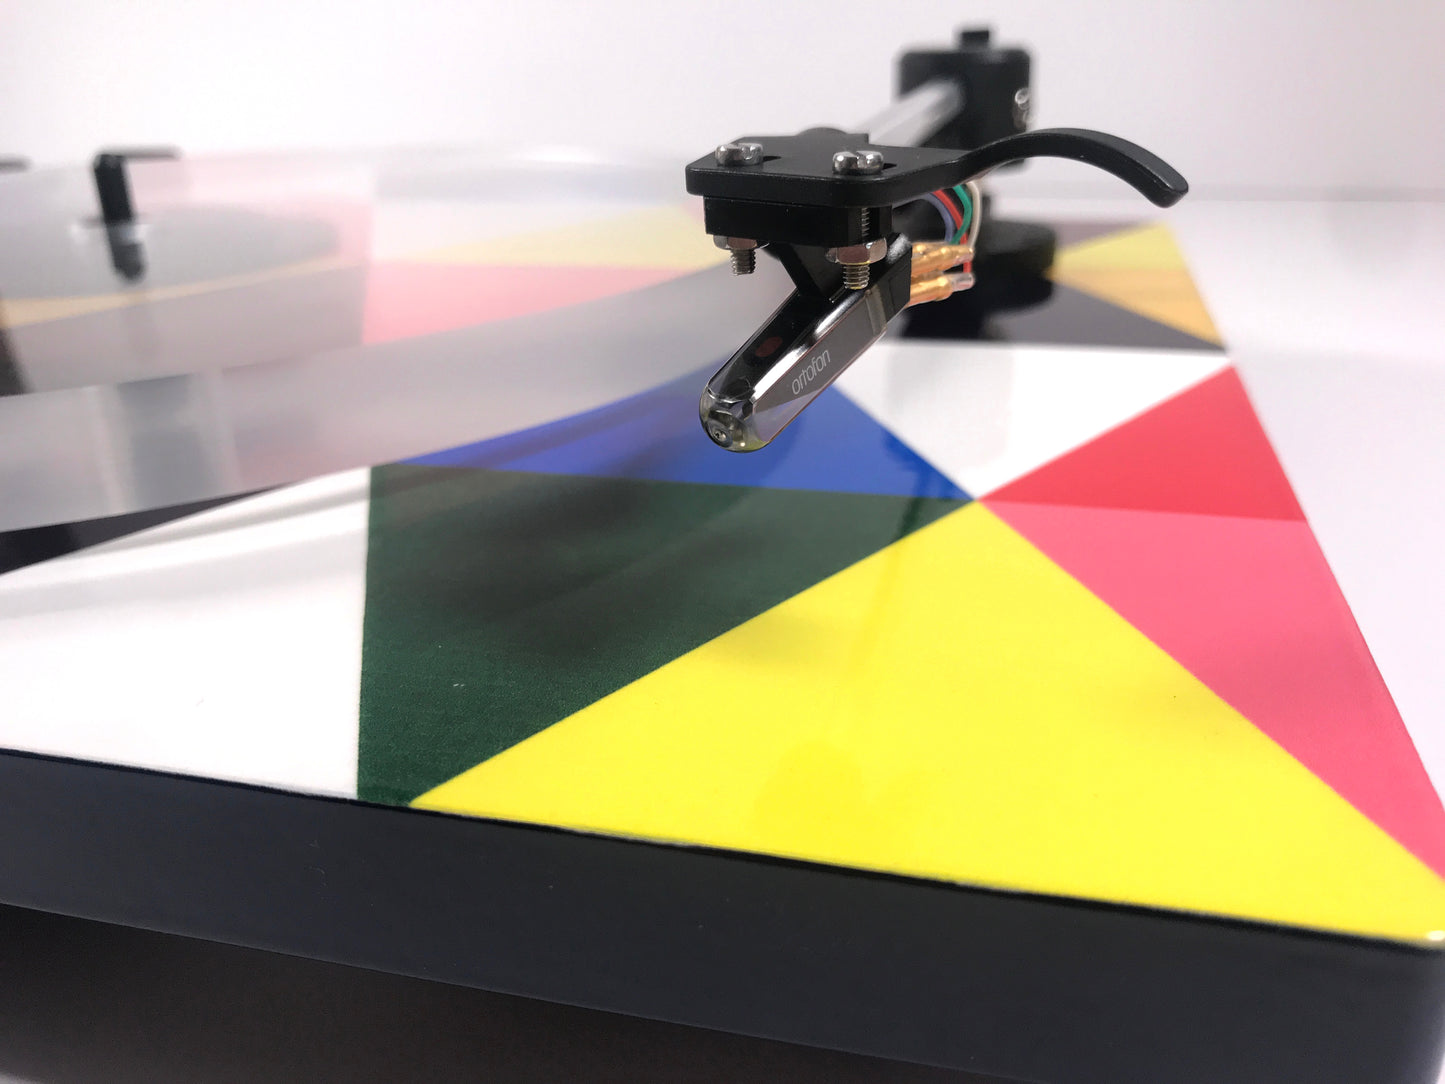 Limited Edition "Eames Inspired" U-Turn Turntable